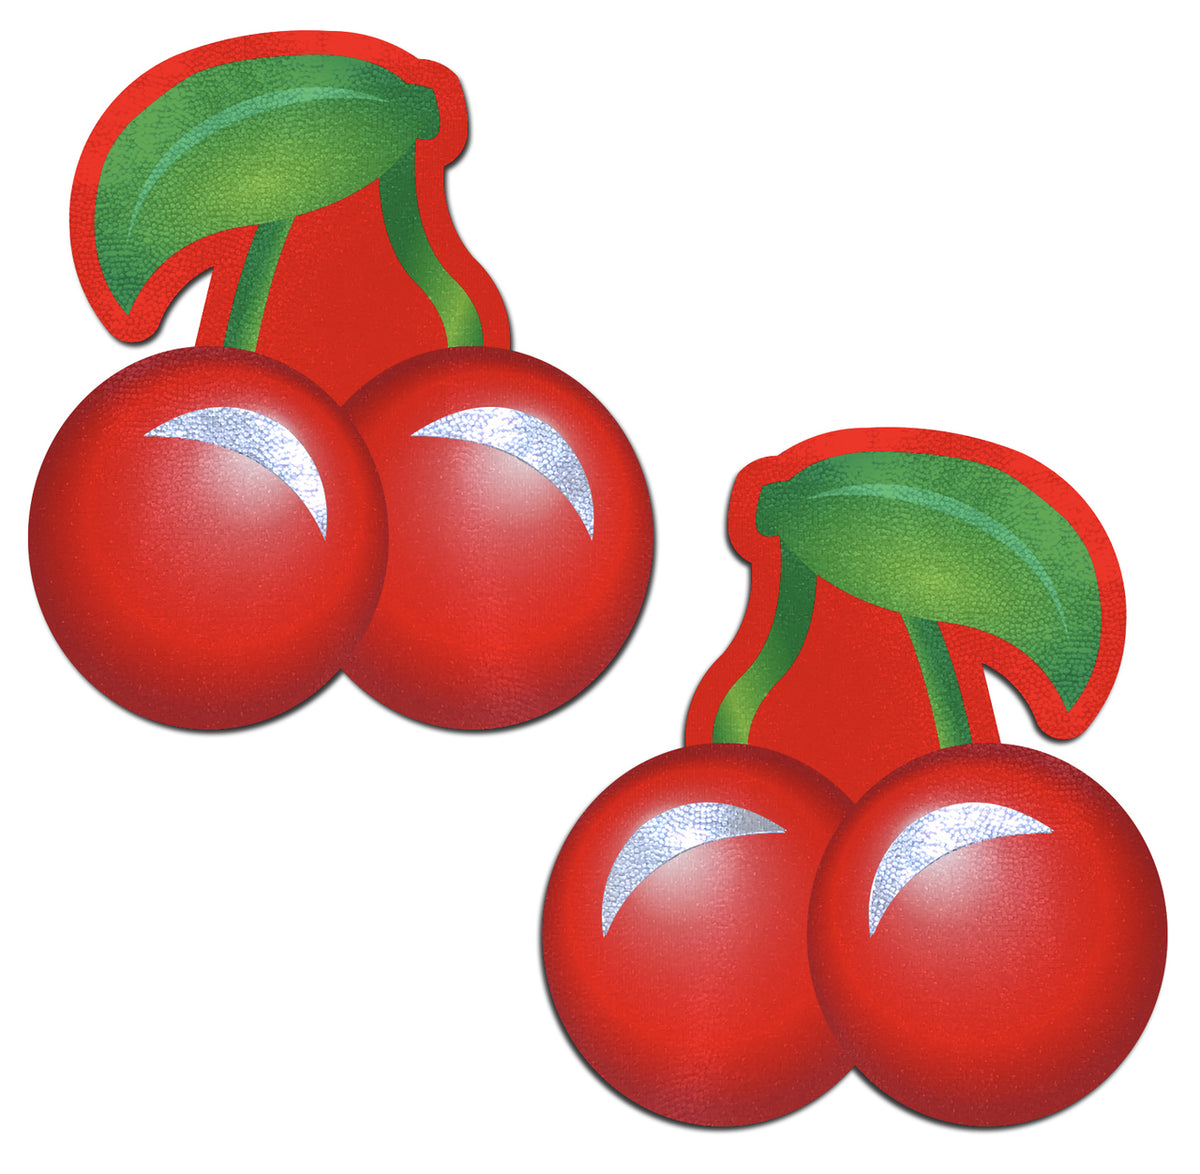 Pastease: Bright Red Cherries with Green Leaf & Stem Pasties - Chynna Dolls Swimwear